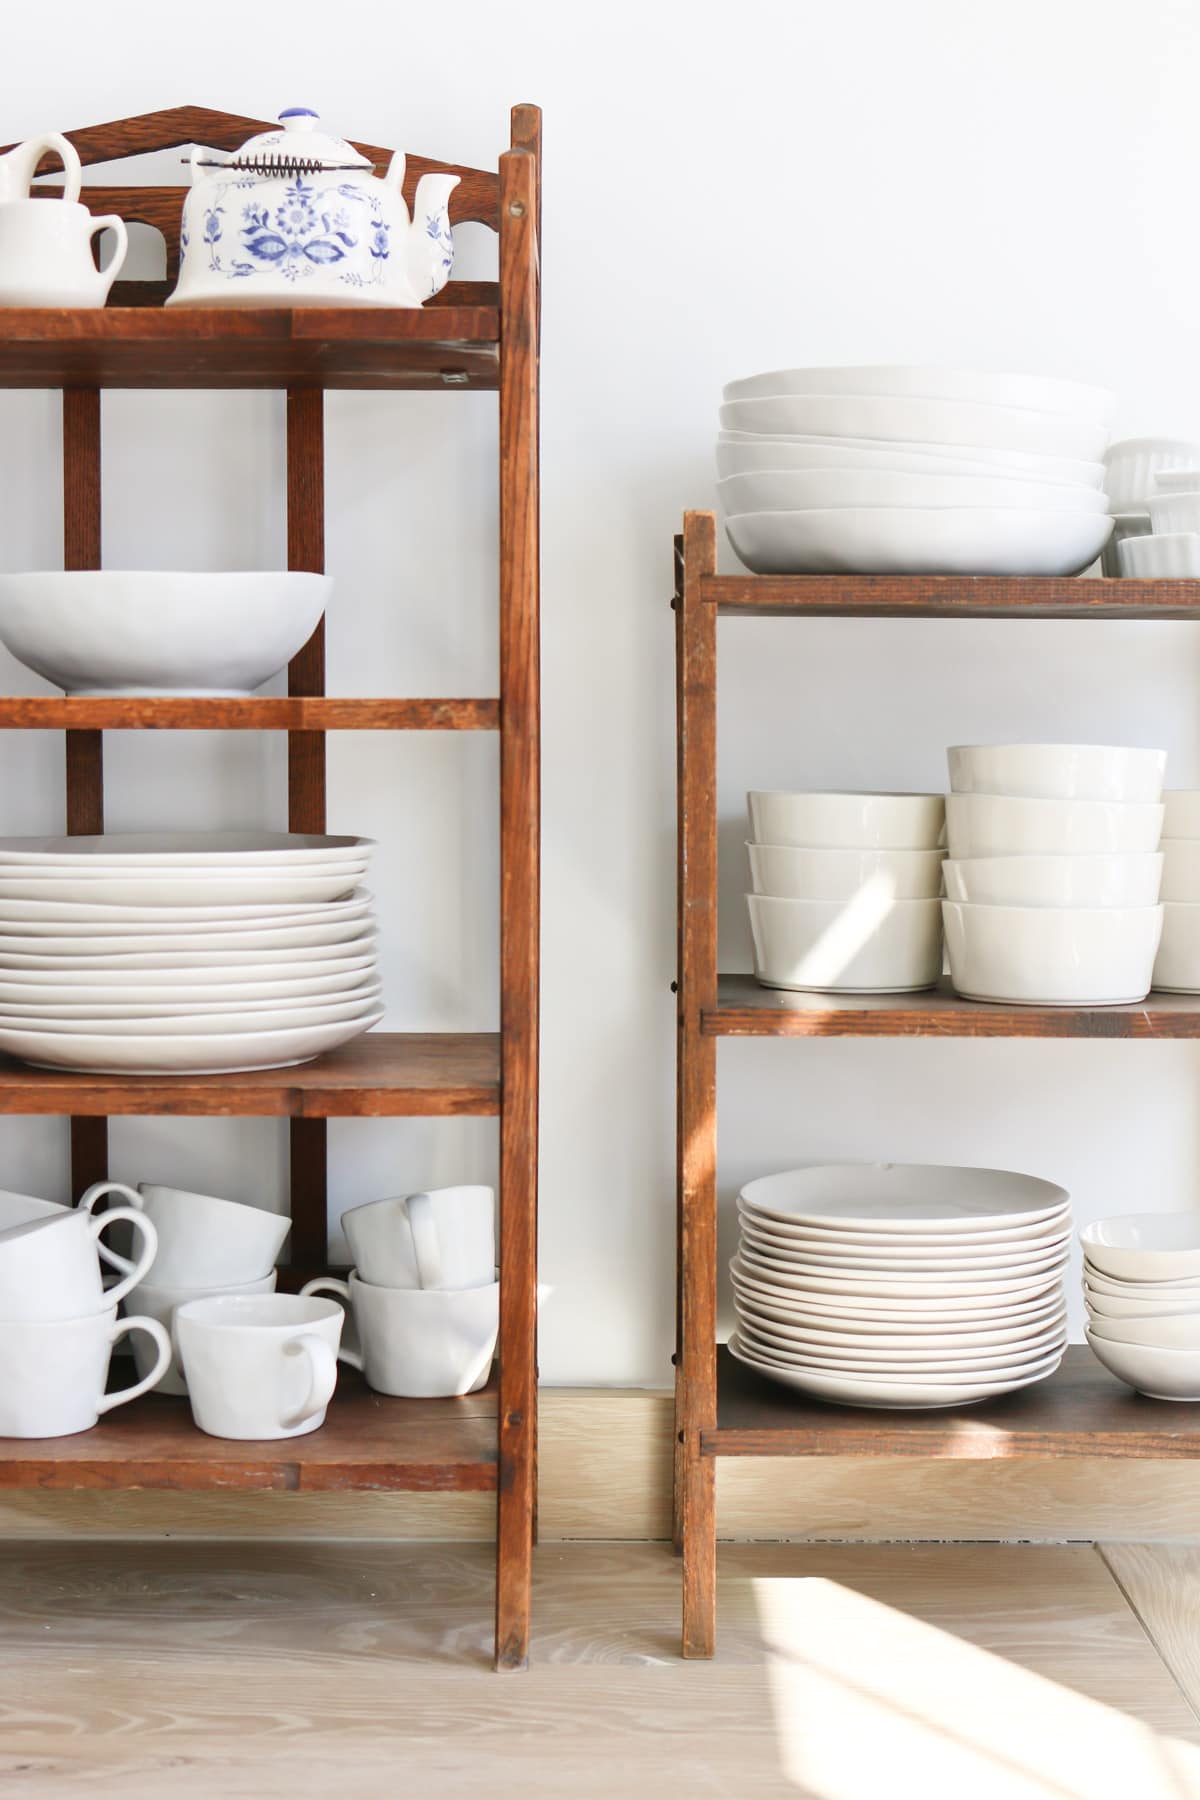 My Six Favorite Textures to Look for when I go Antique Shopping